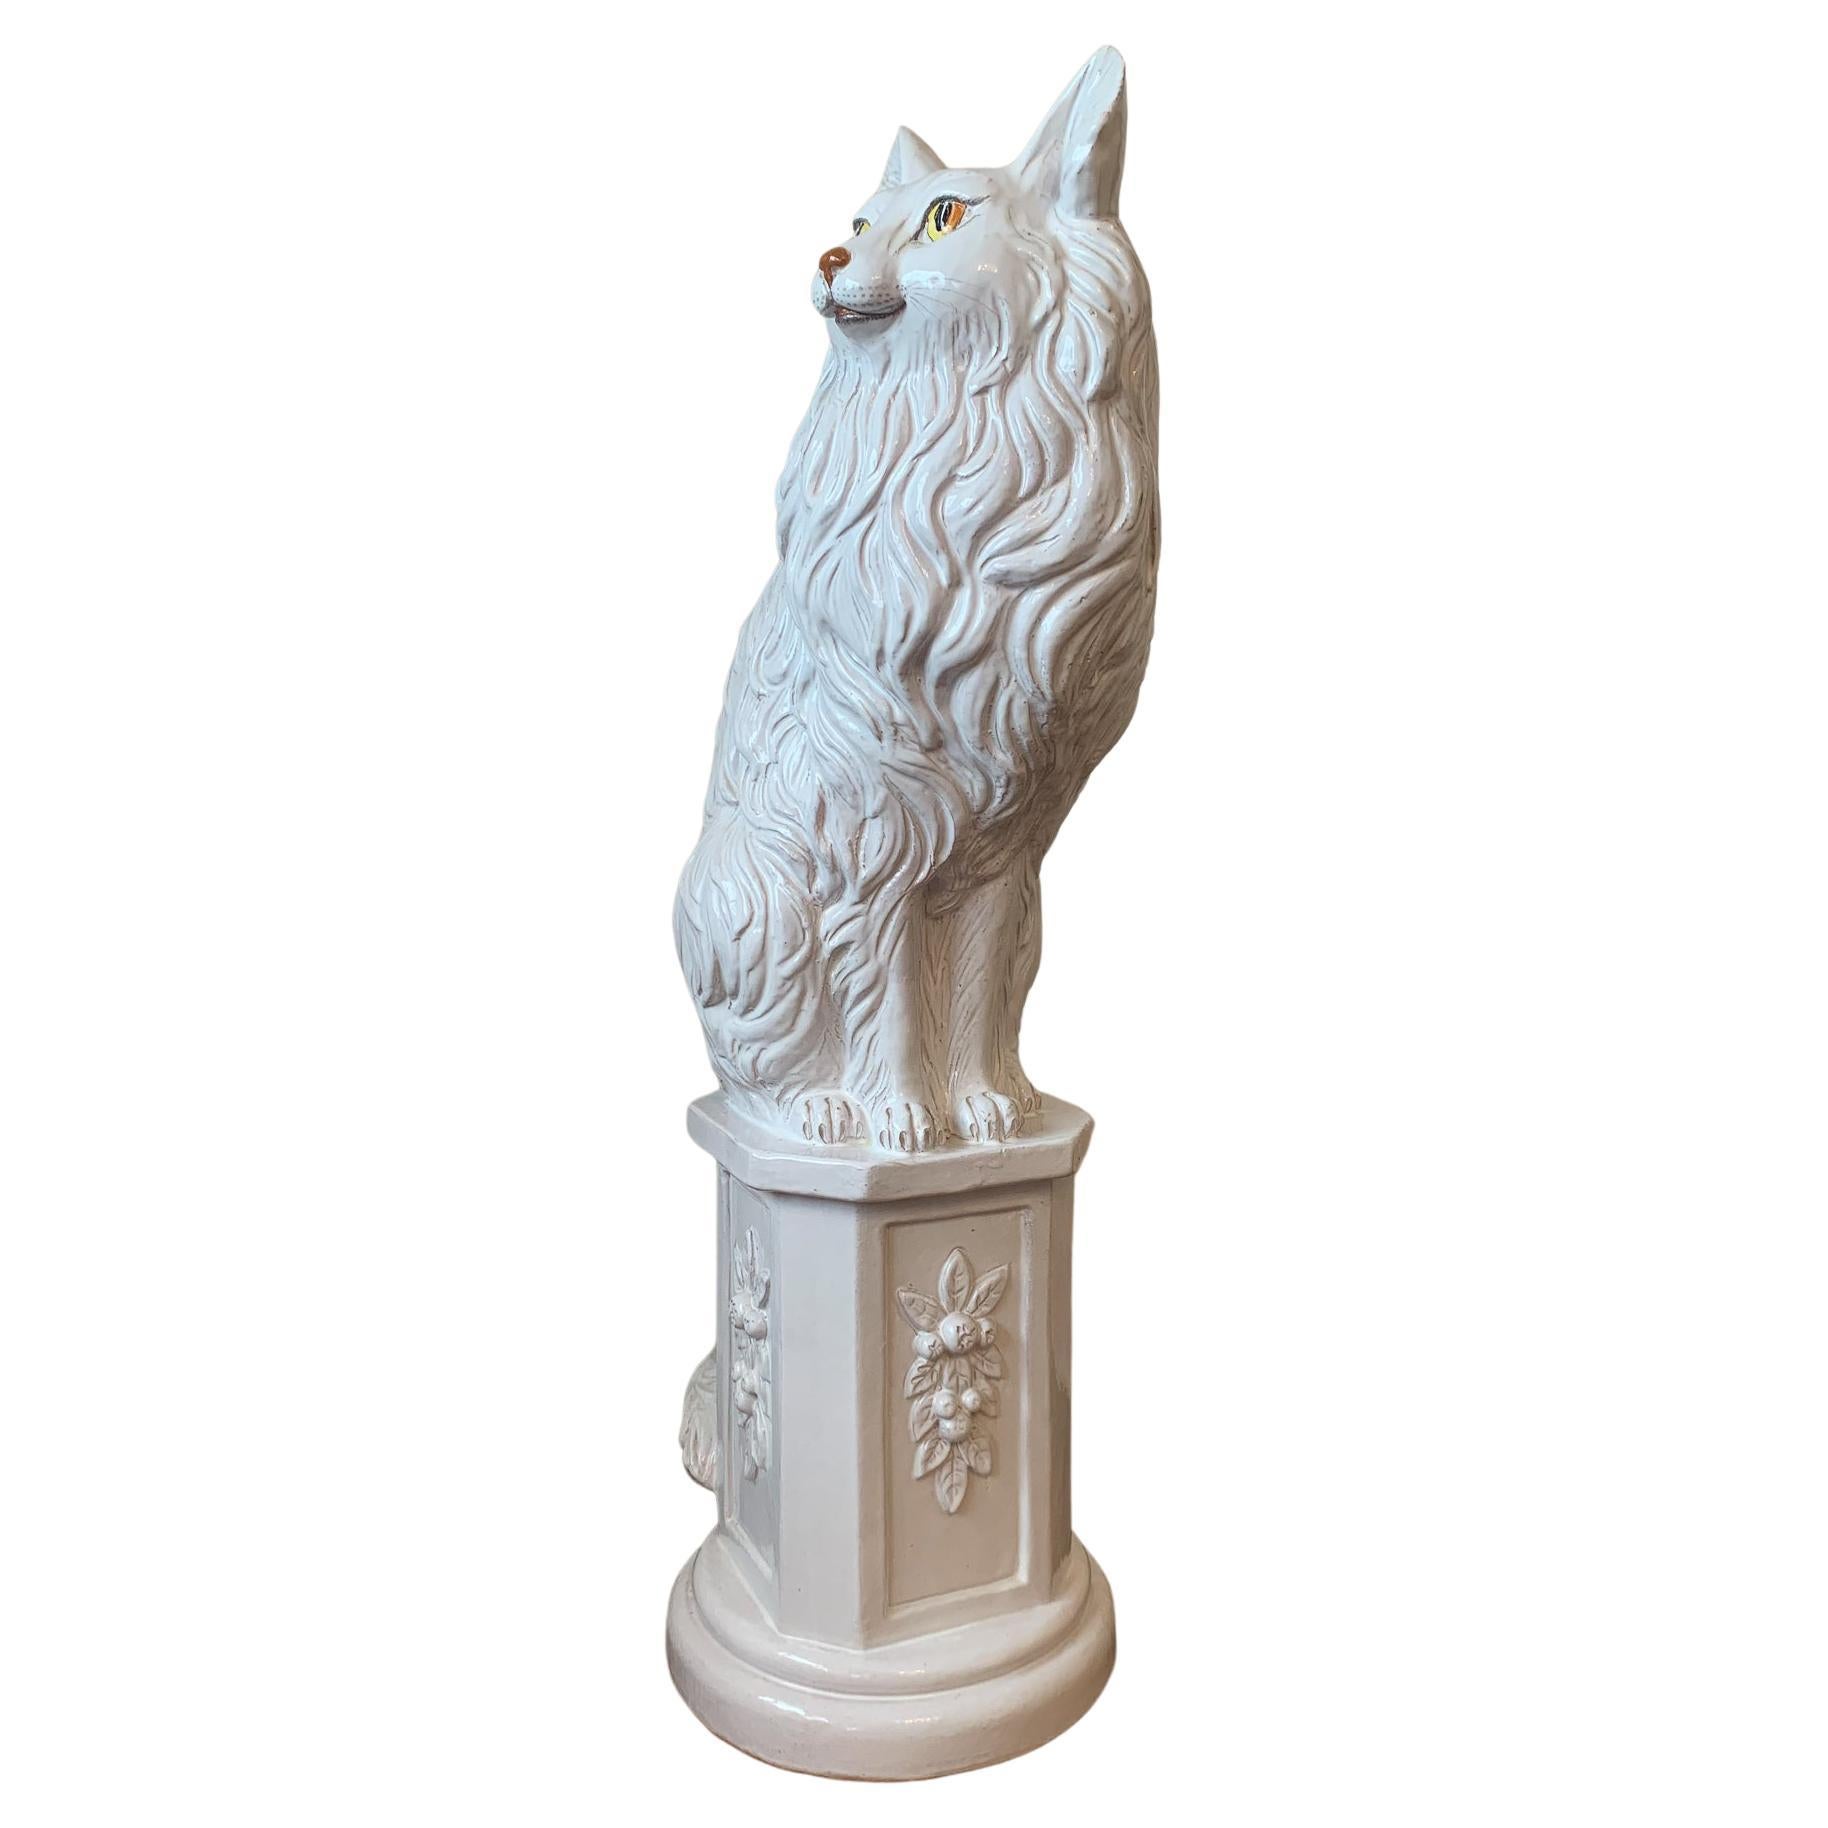 Fabulous larger than life cat or fox sculpture, seated on a pedestal, in white glazed ceramic with attractive yellow-orange eyes. Our foxy friend is one hand-built unit, with evocative MCM styling, and signed inside the hollowed core. There are